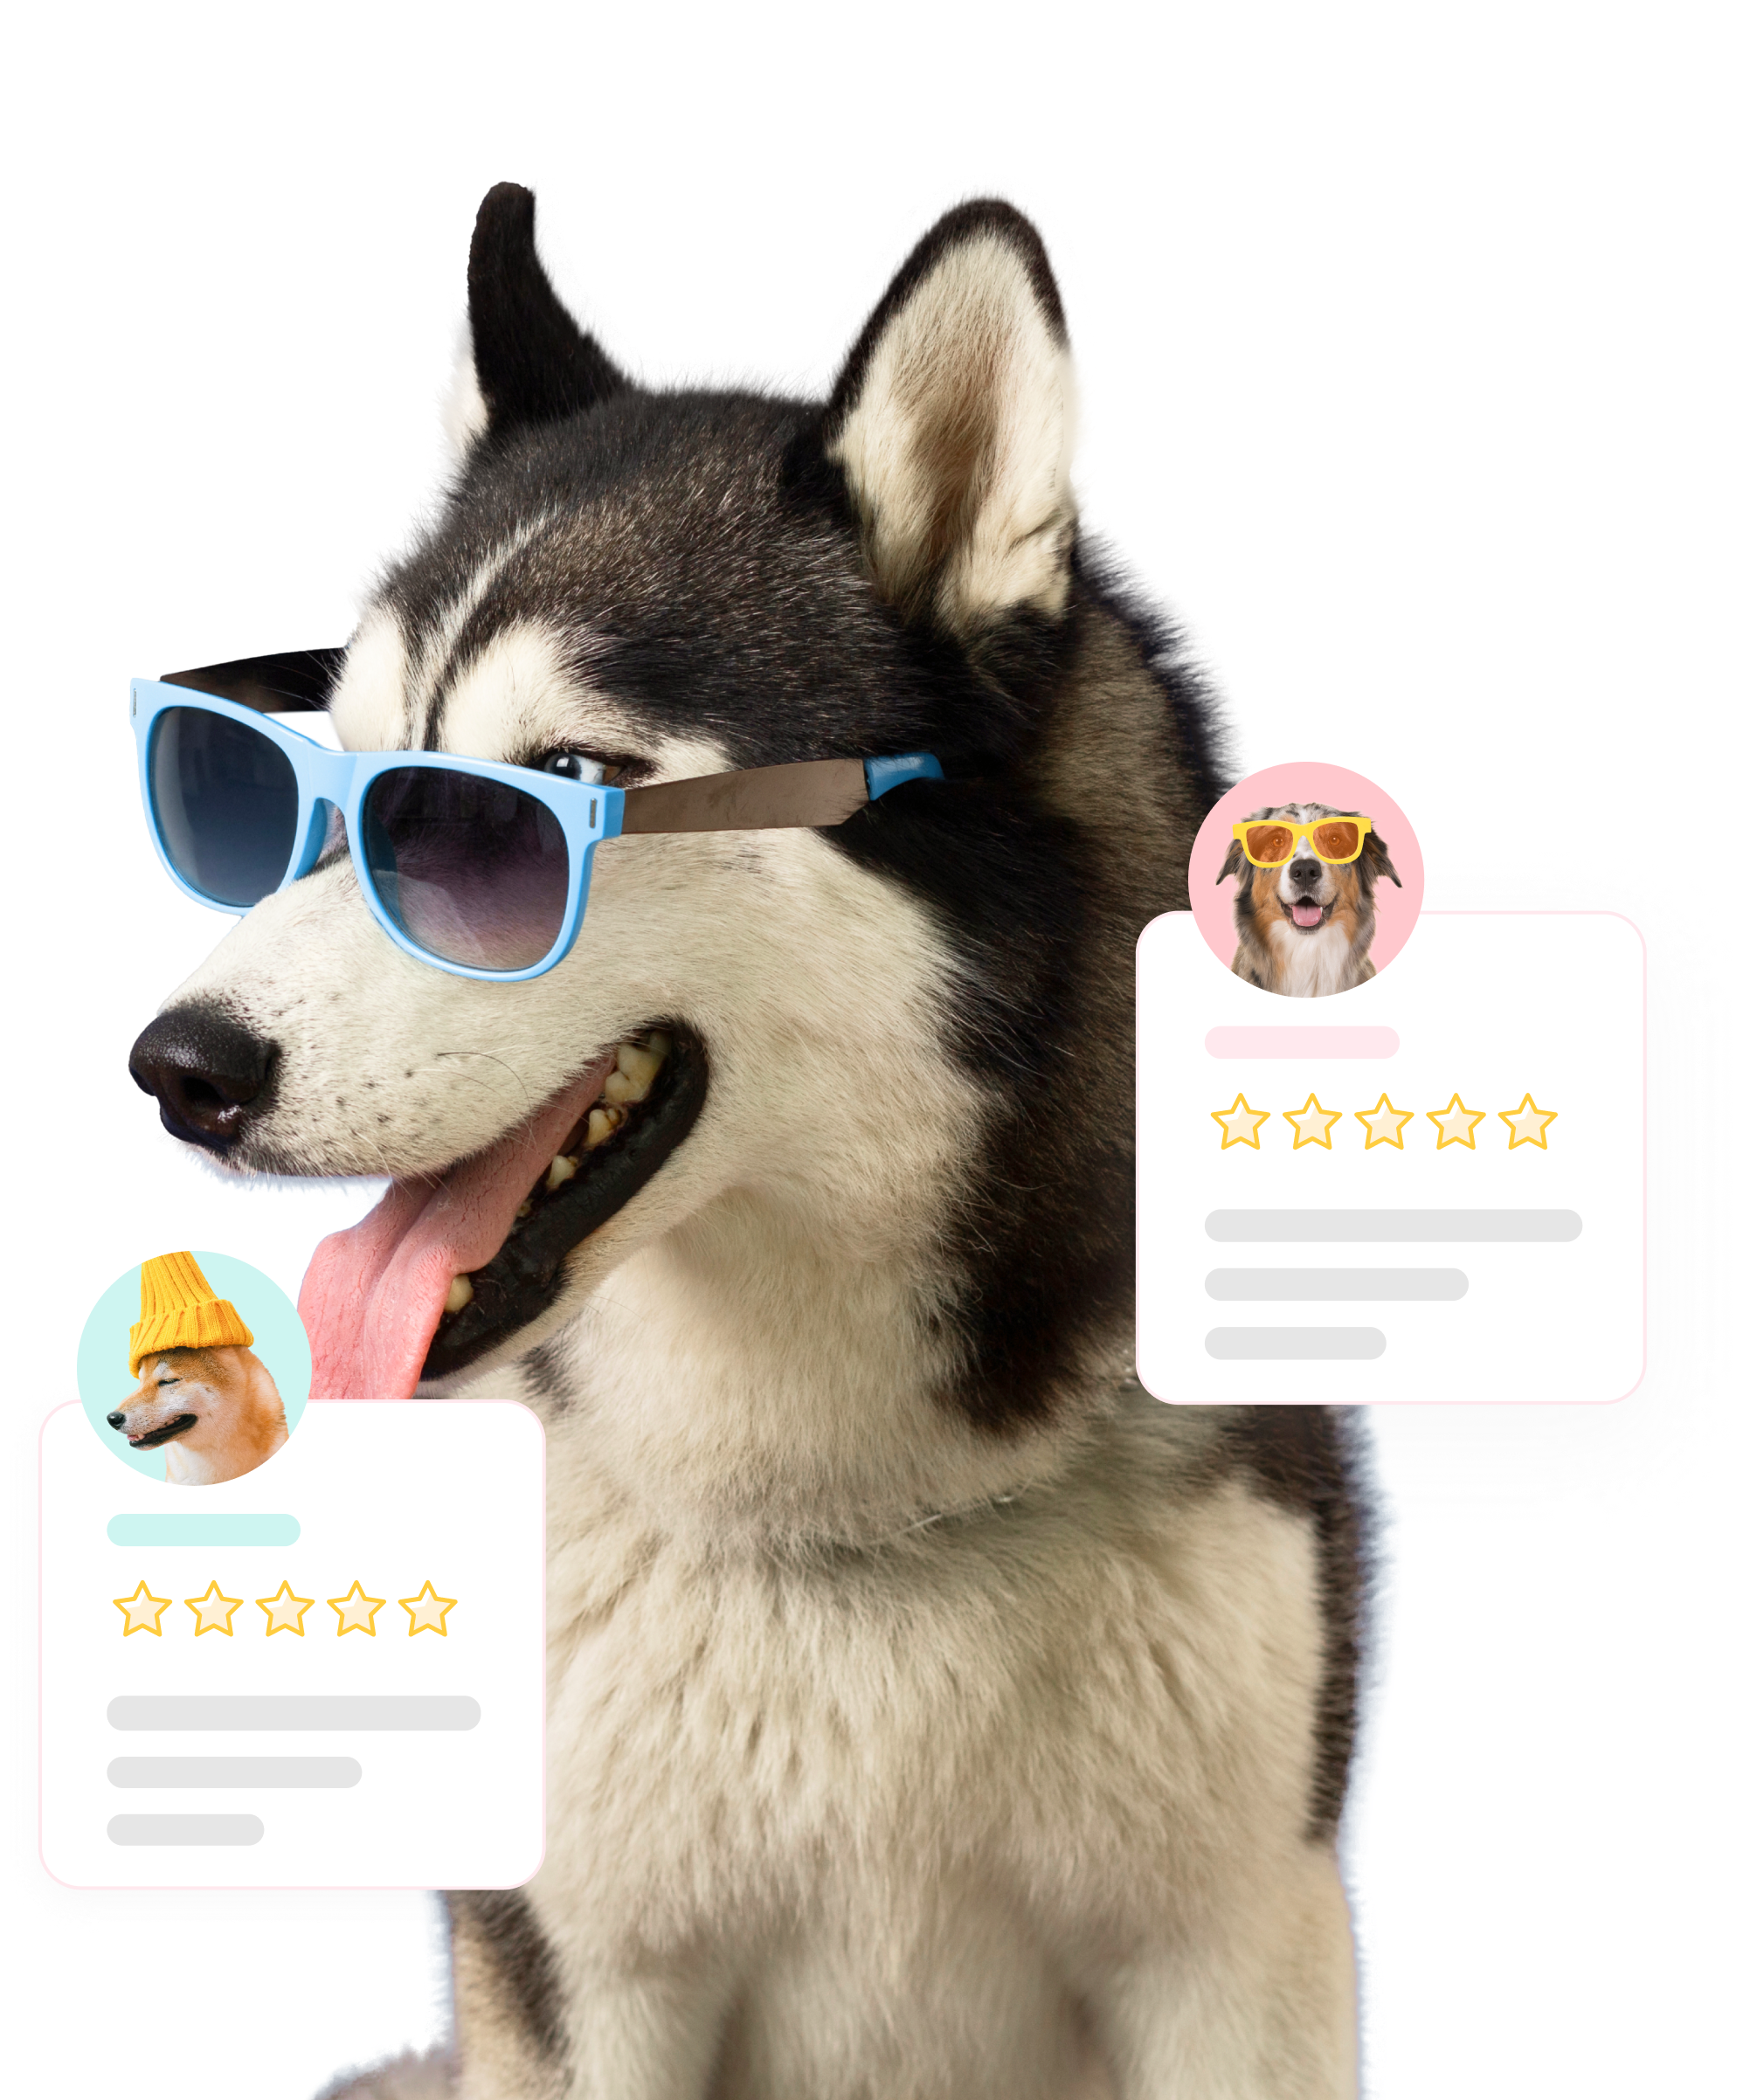 Dog with its tongue out wearing a sunglass. There are two testimonial cards on the image.